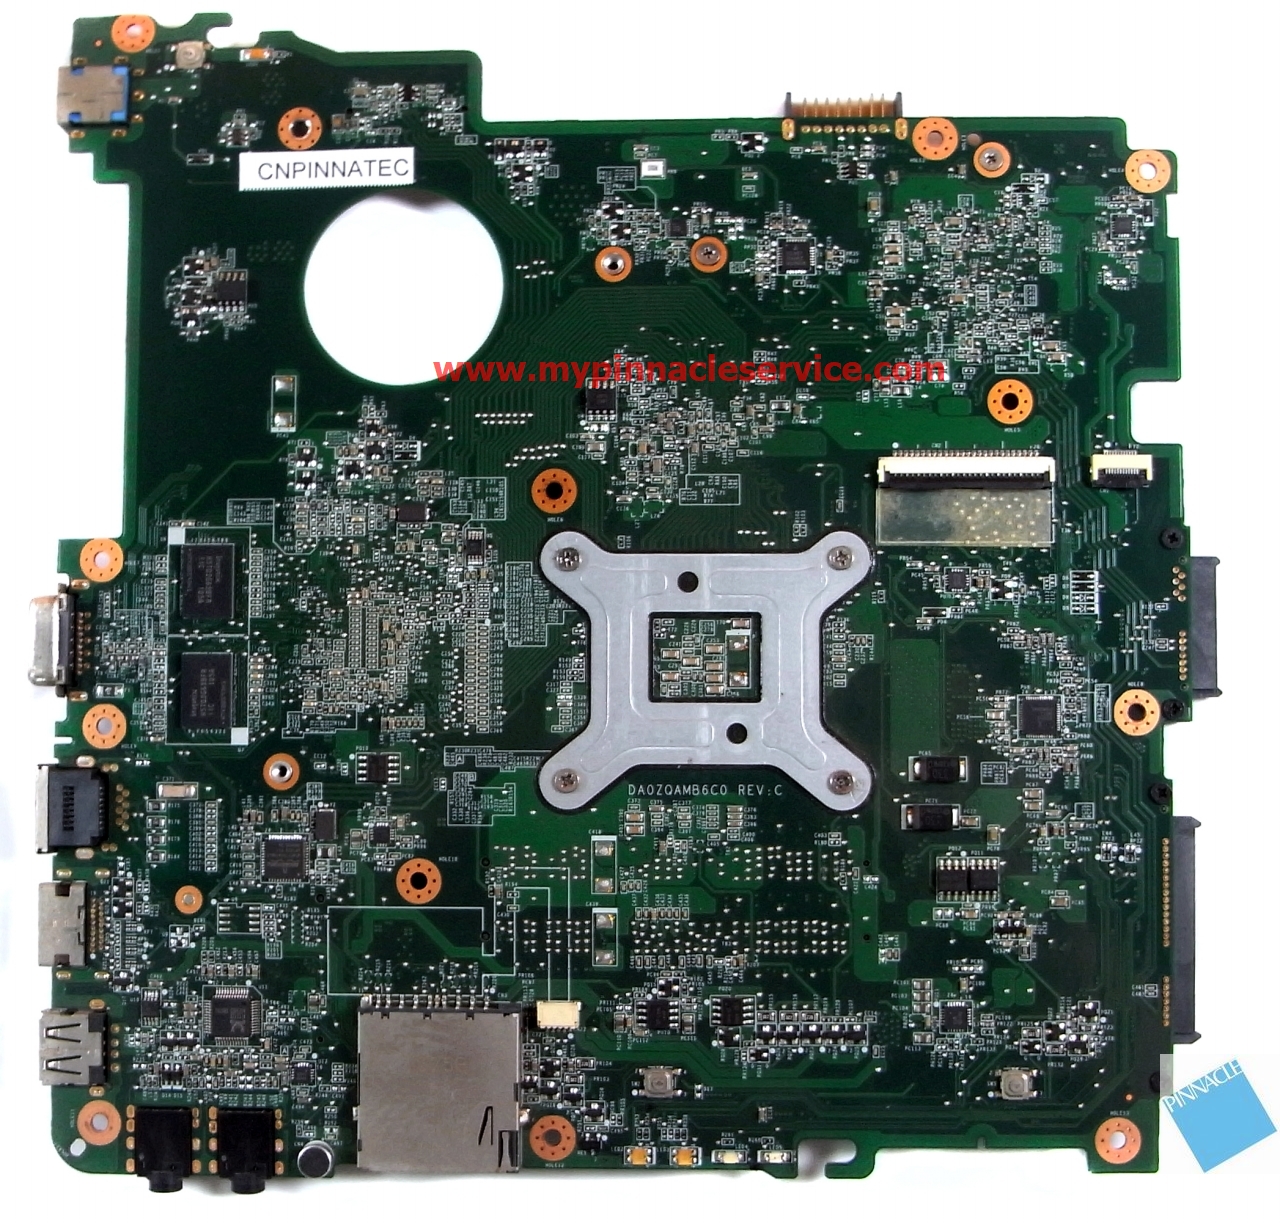 mbrp706001-motherboard-for-acer-aspire-4552g-da0zqamb6c0-31zqamb00f0-rimg0106.jpg